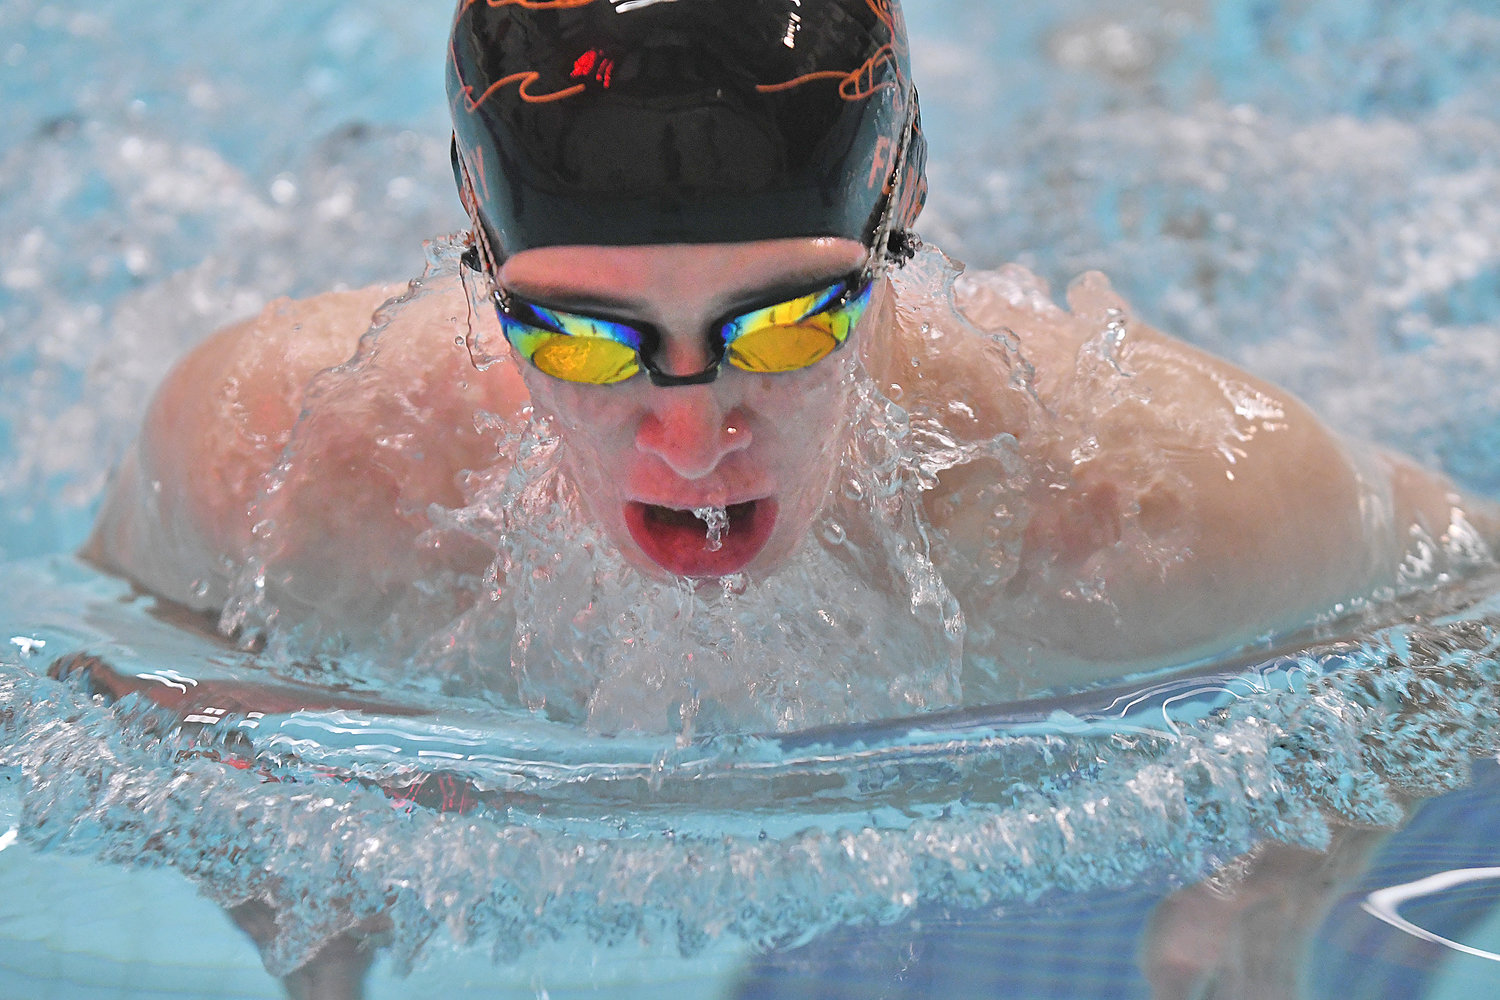 Rome Free Academy's Sean Feeney competes in the breaststroke leg of the 200-yard medley relay on Tuesday at Holland Patent. The Black Knights won the relay, but lost the event 53-49. Feeney also won the 100 backstroke in 1:08.87.